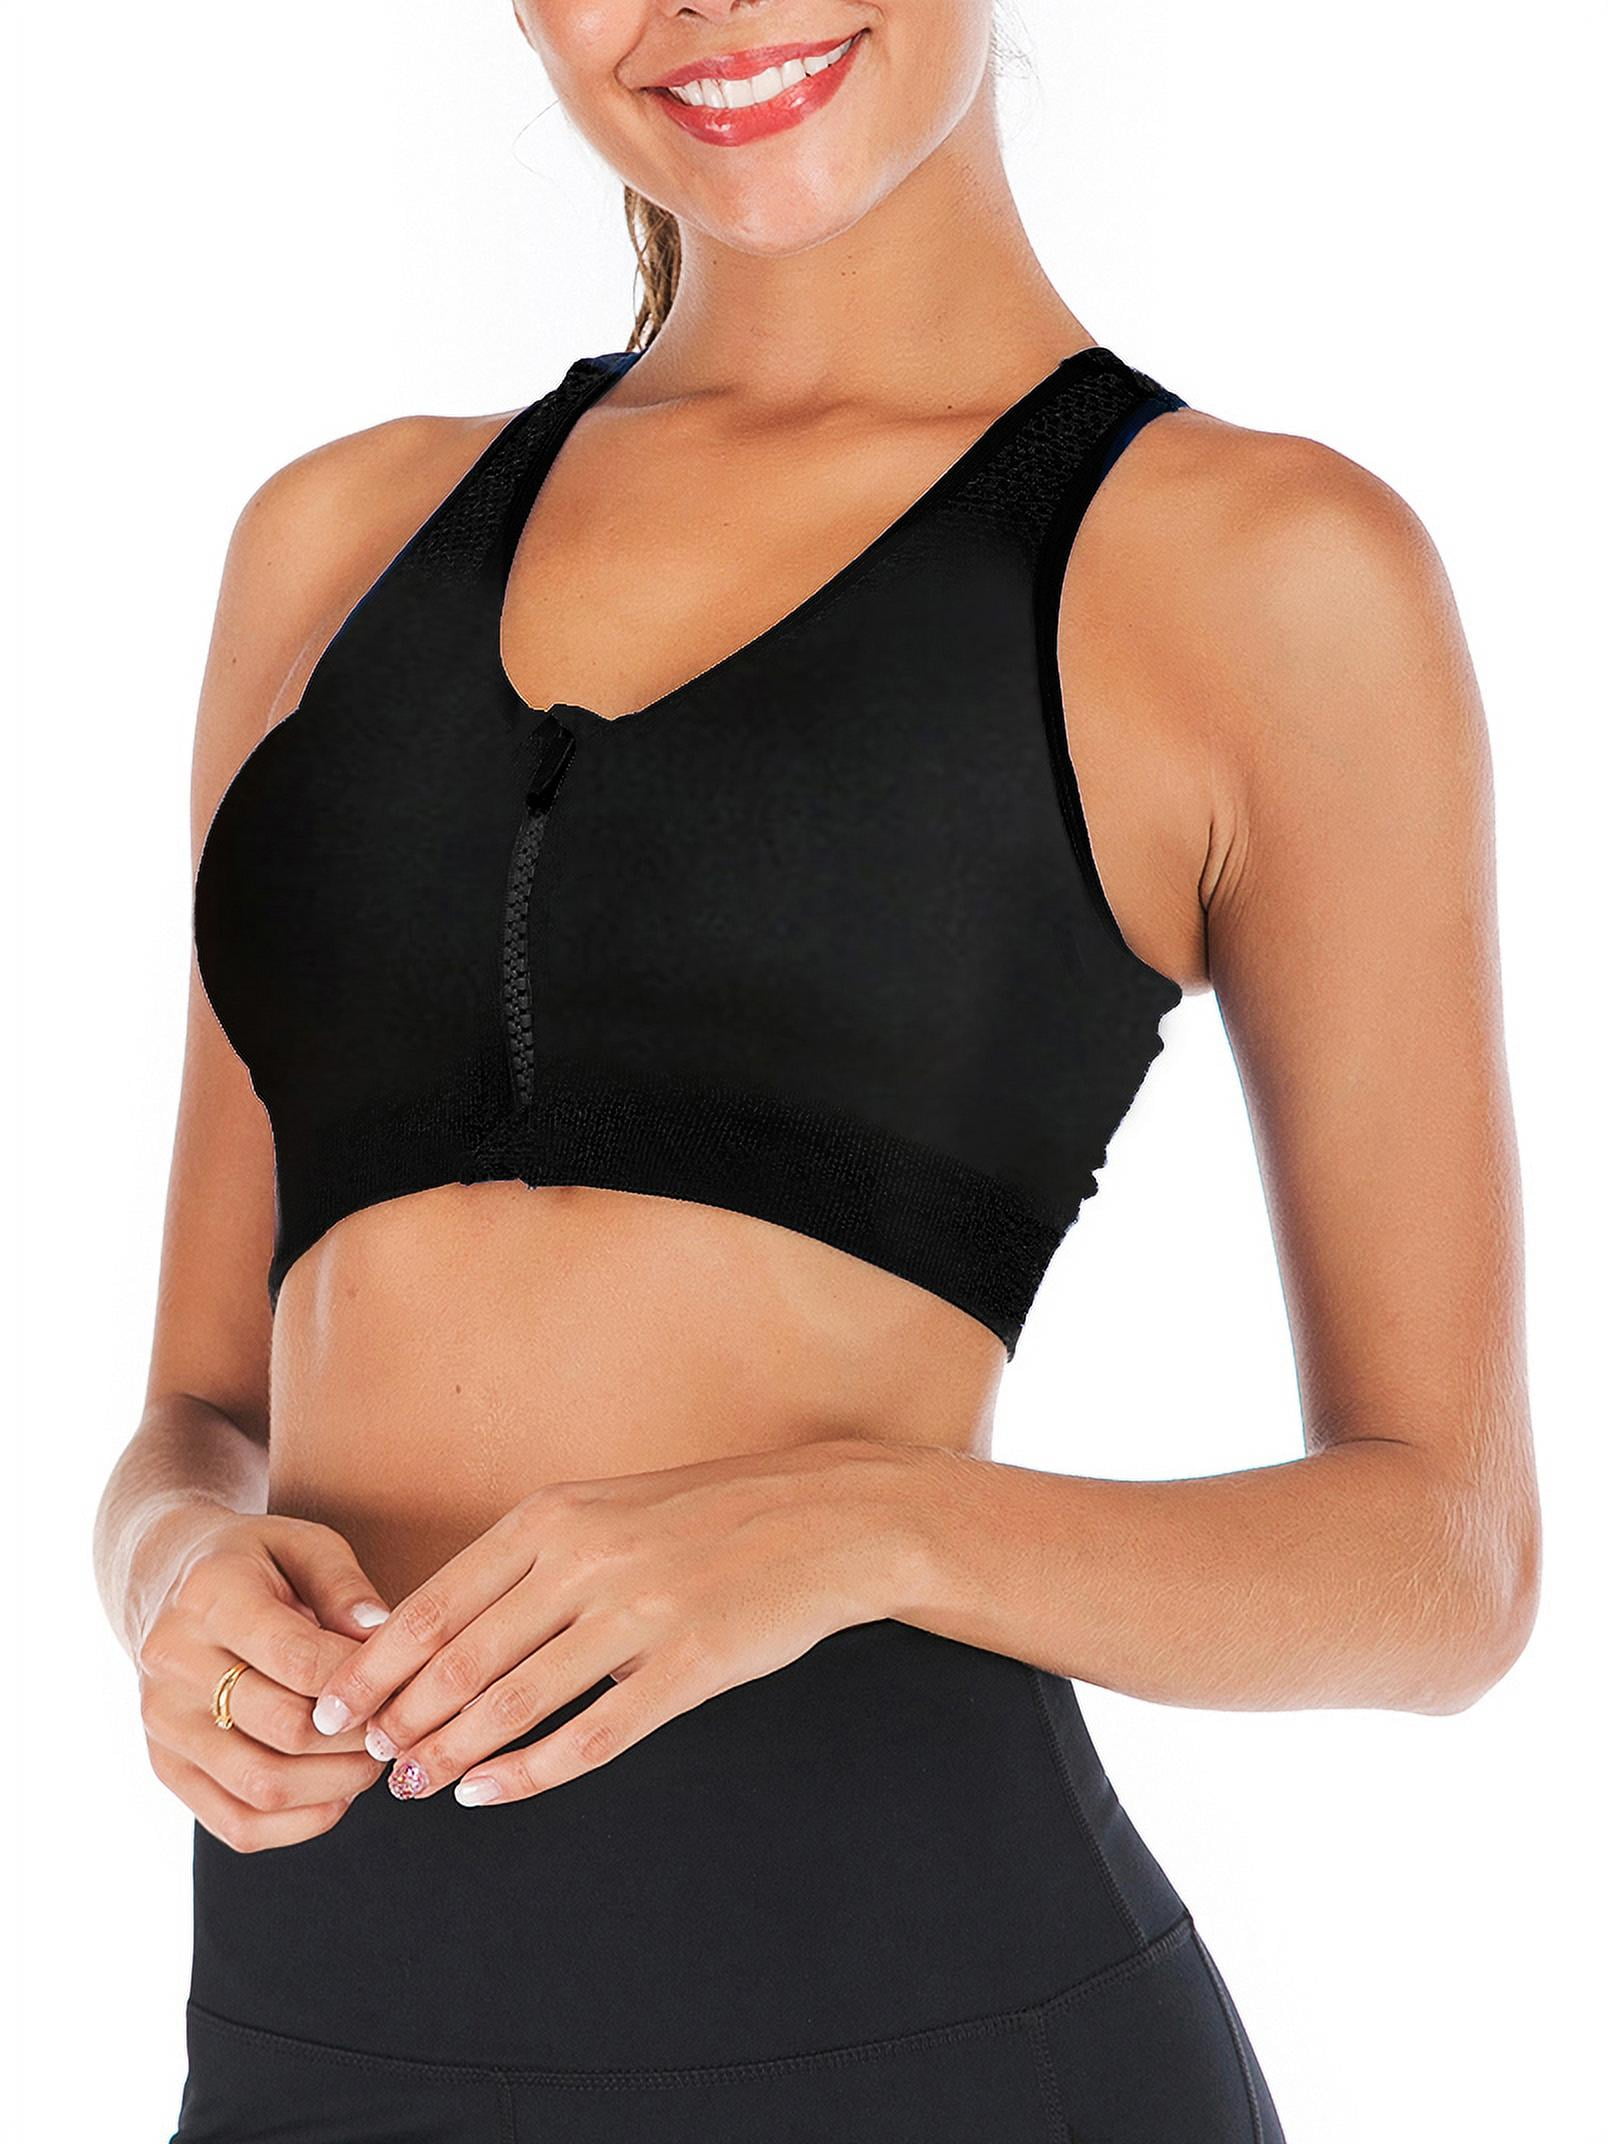 Best Deal for Liwitar Sports Bras for Women Pack High Neck Workout Tops